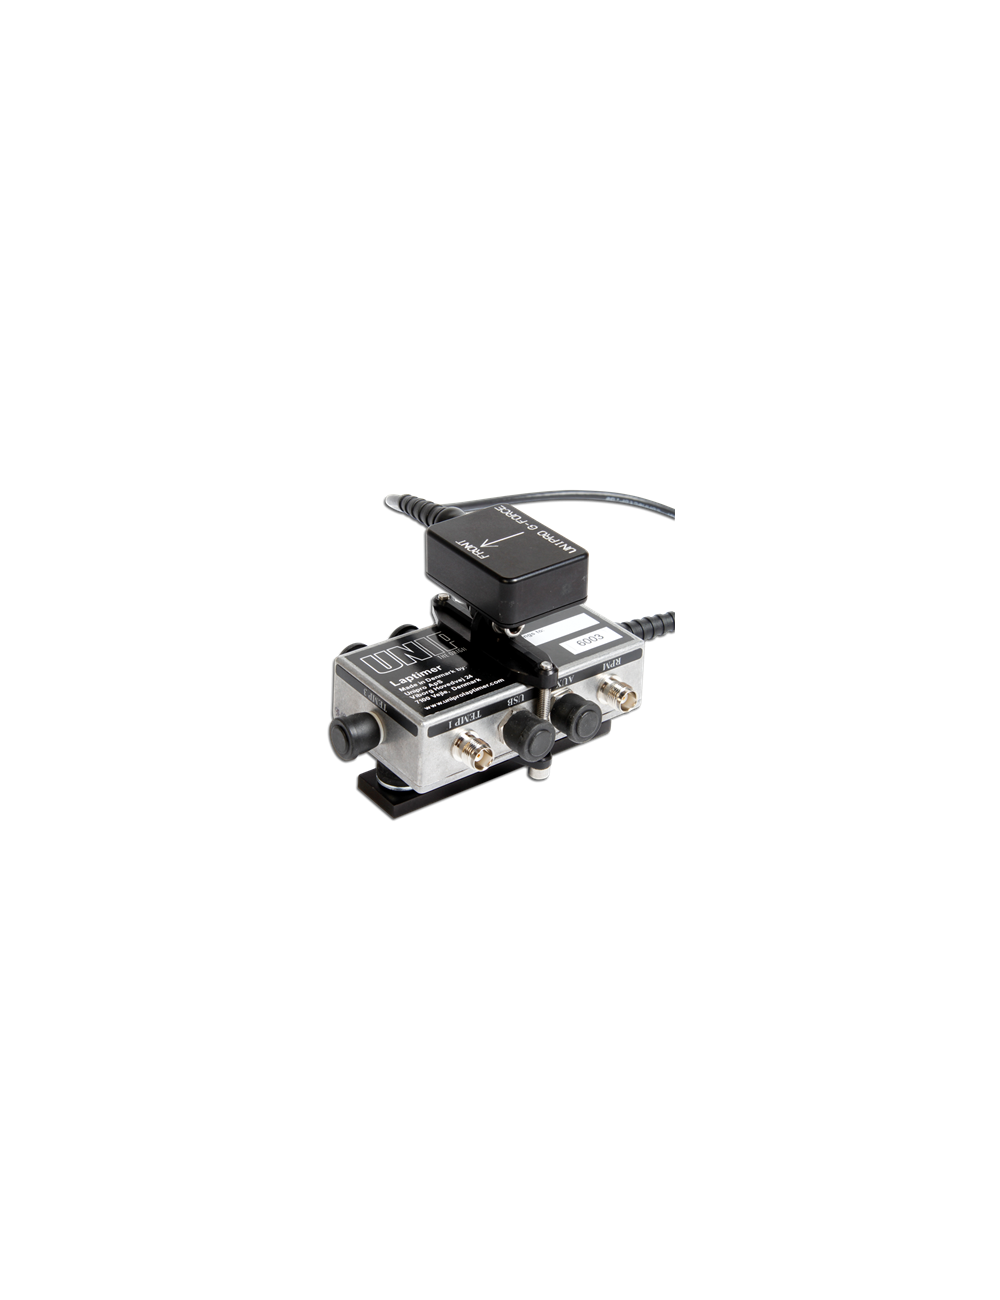 G Force sensor with mounting